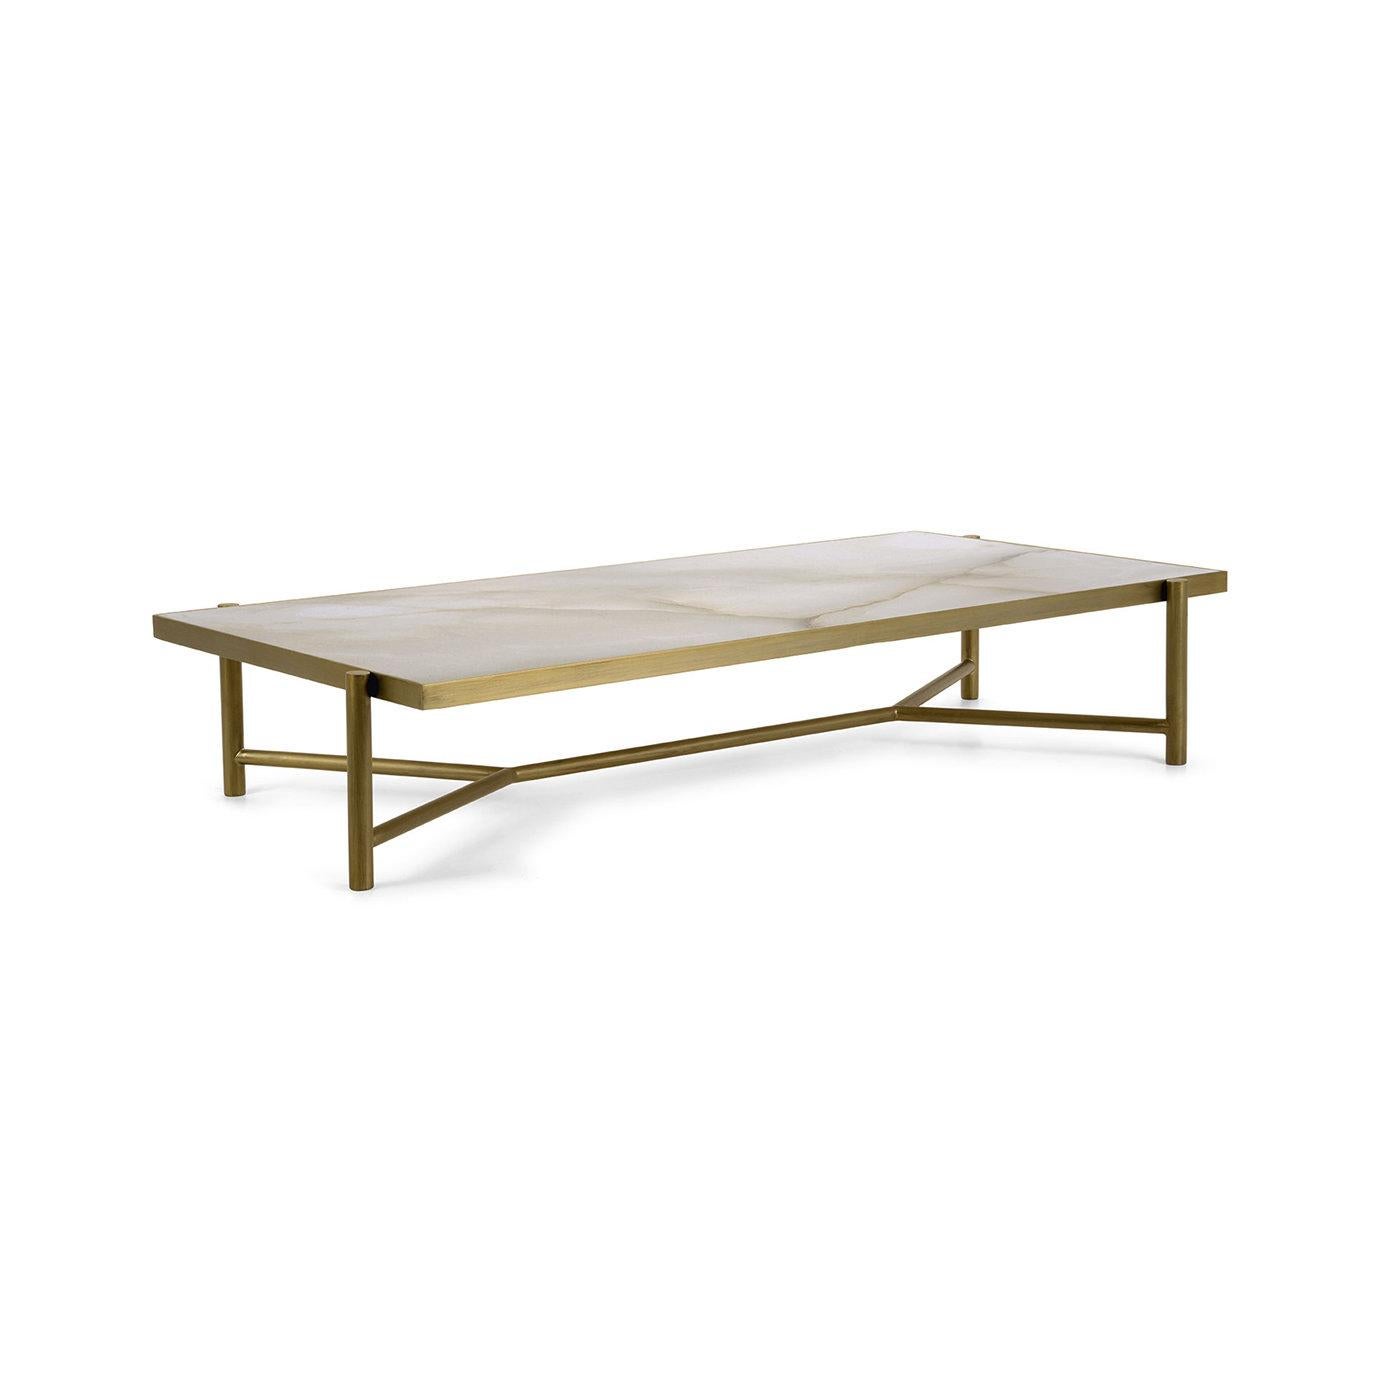 Refined in its rigorous simplicity, this glamorous coffee table is part of a collection inspired by Rhea, Titaness and mother of Zeus in Greek mythology. The dynamic metal structure with a burnished brass finish comprises the legs sustaining the